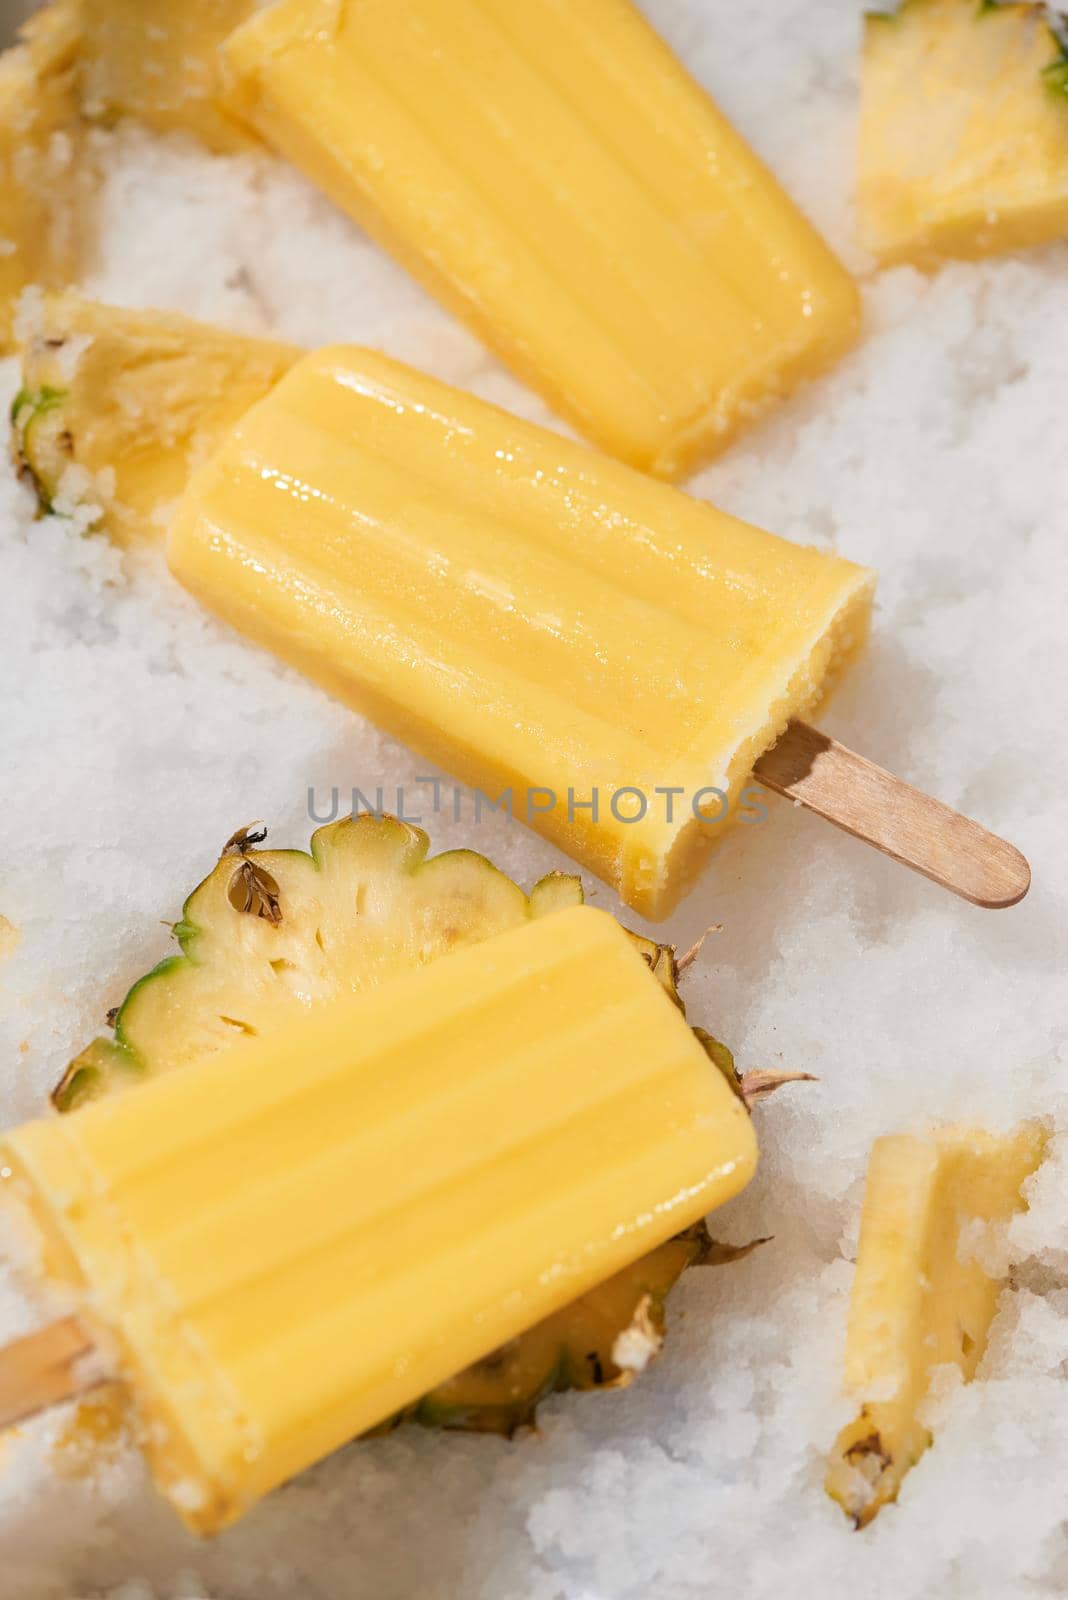 Homemade popsicles with pineapple on stick, top view by makidotvn